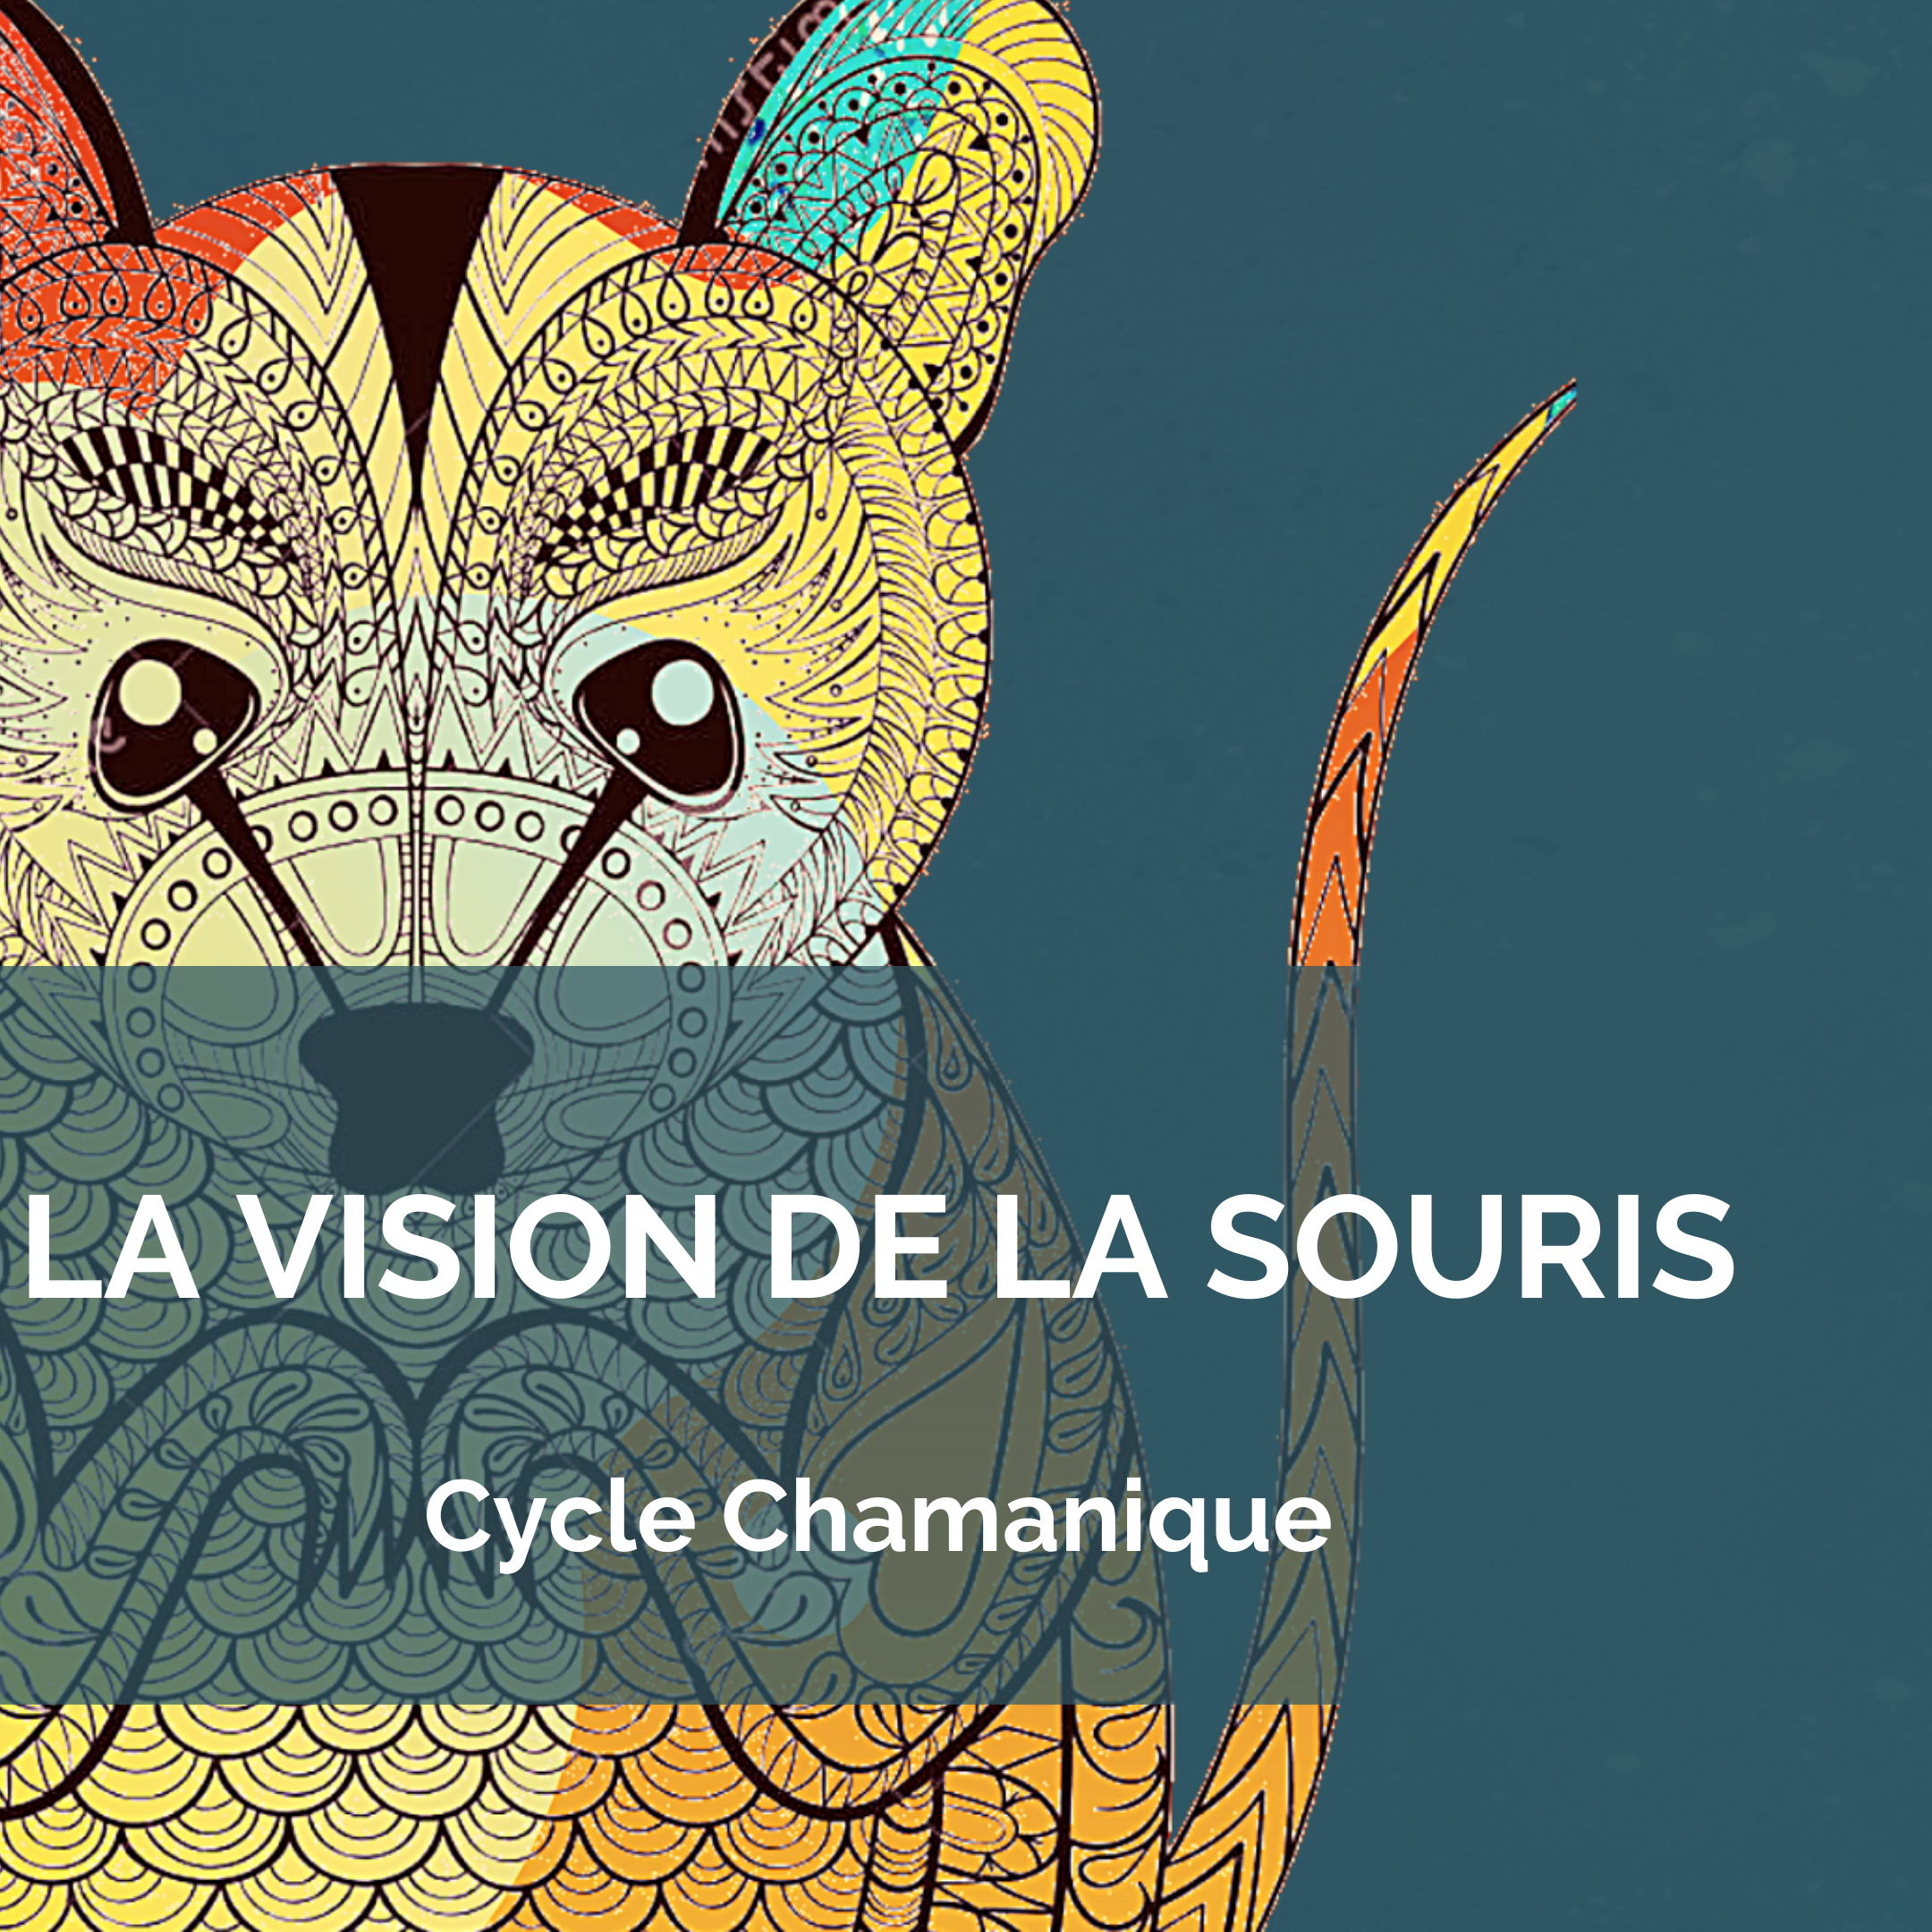 Cycle Chamanique